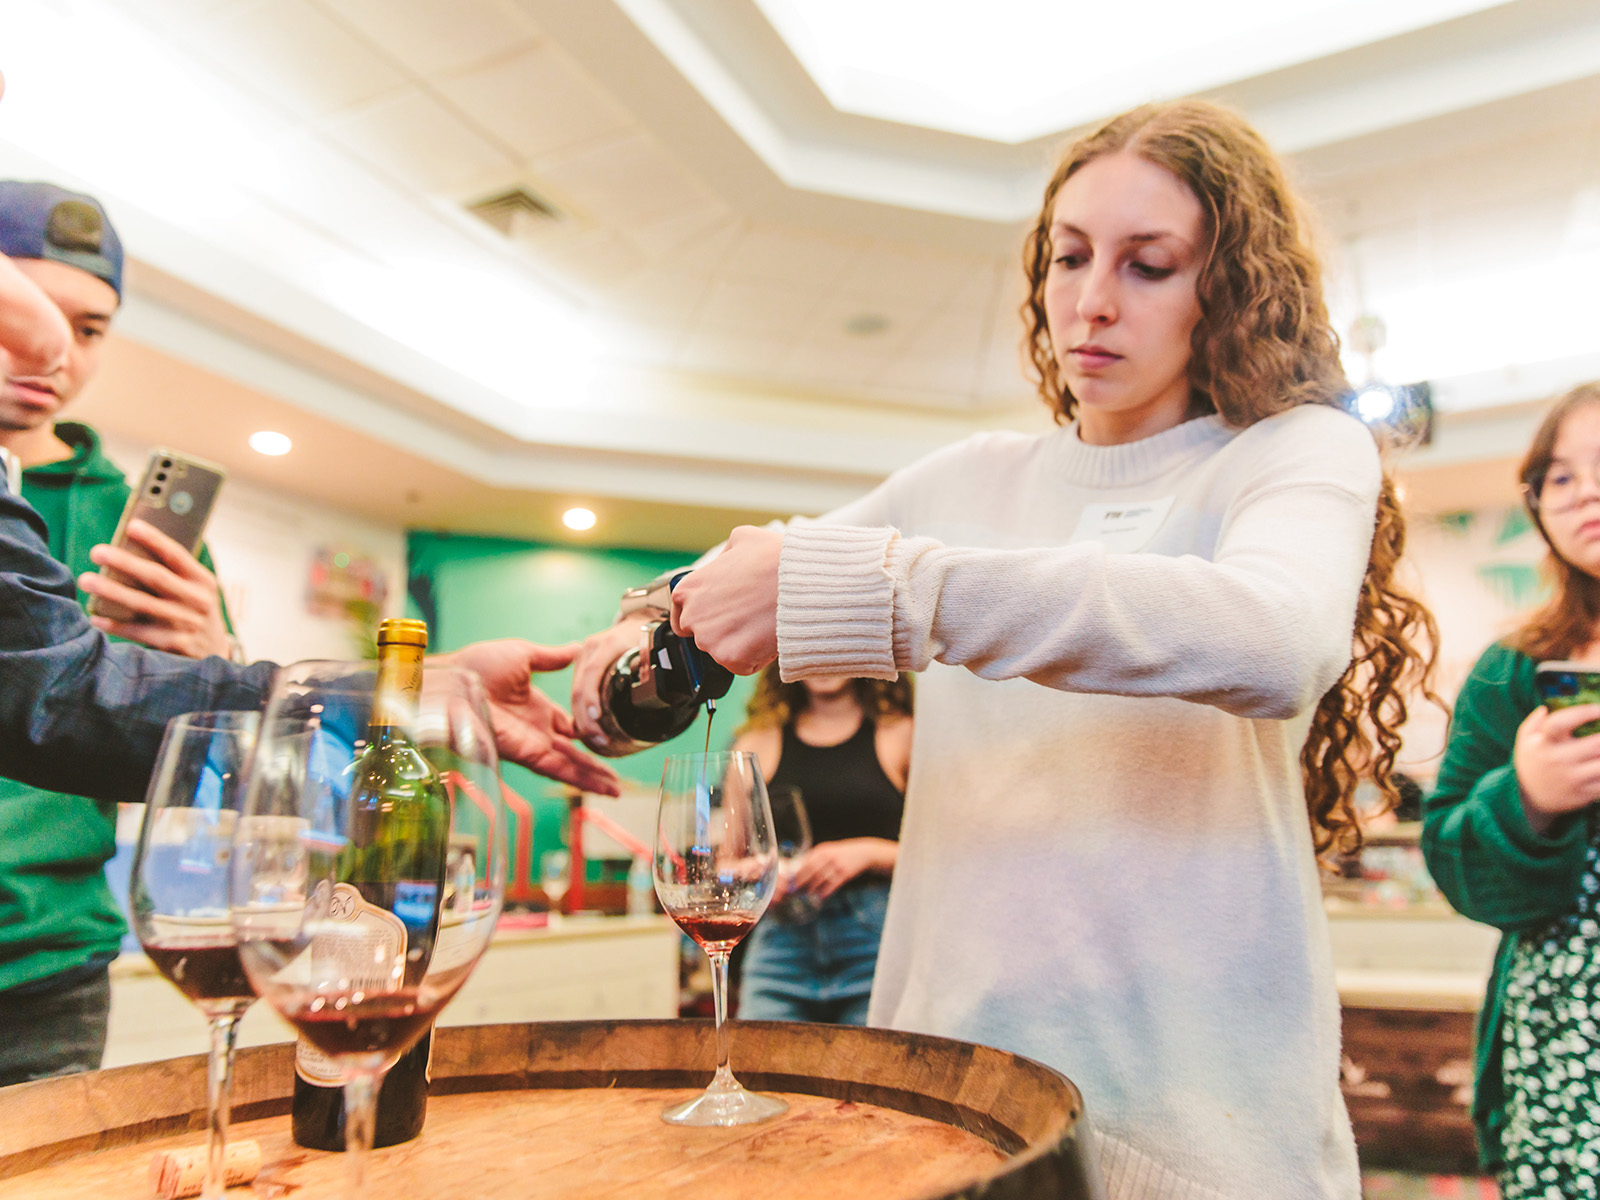 A College of Hospitality student pouring wine